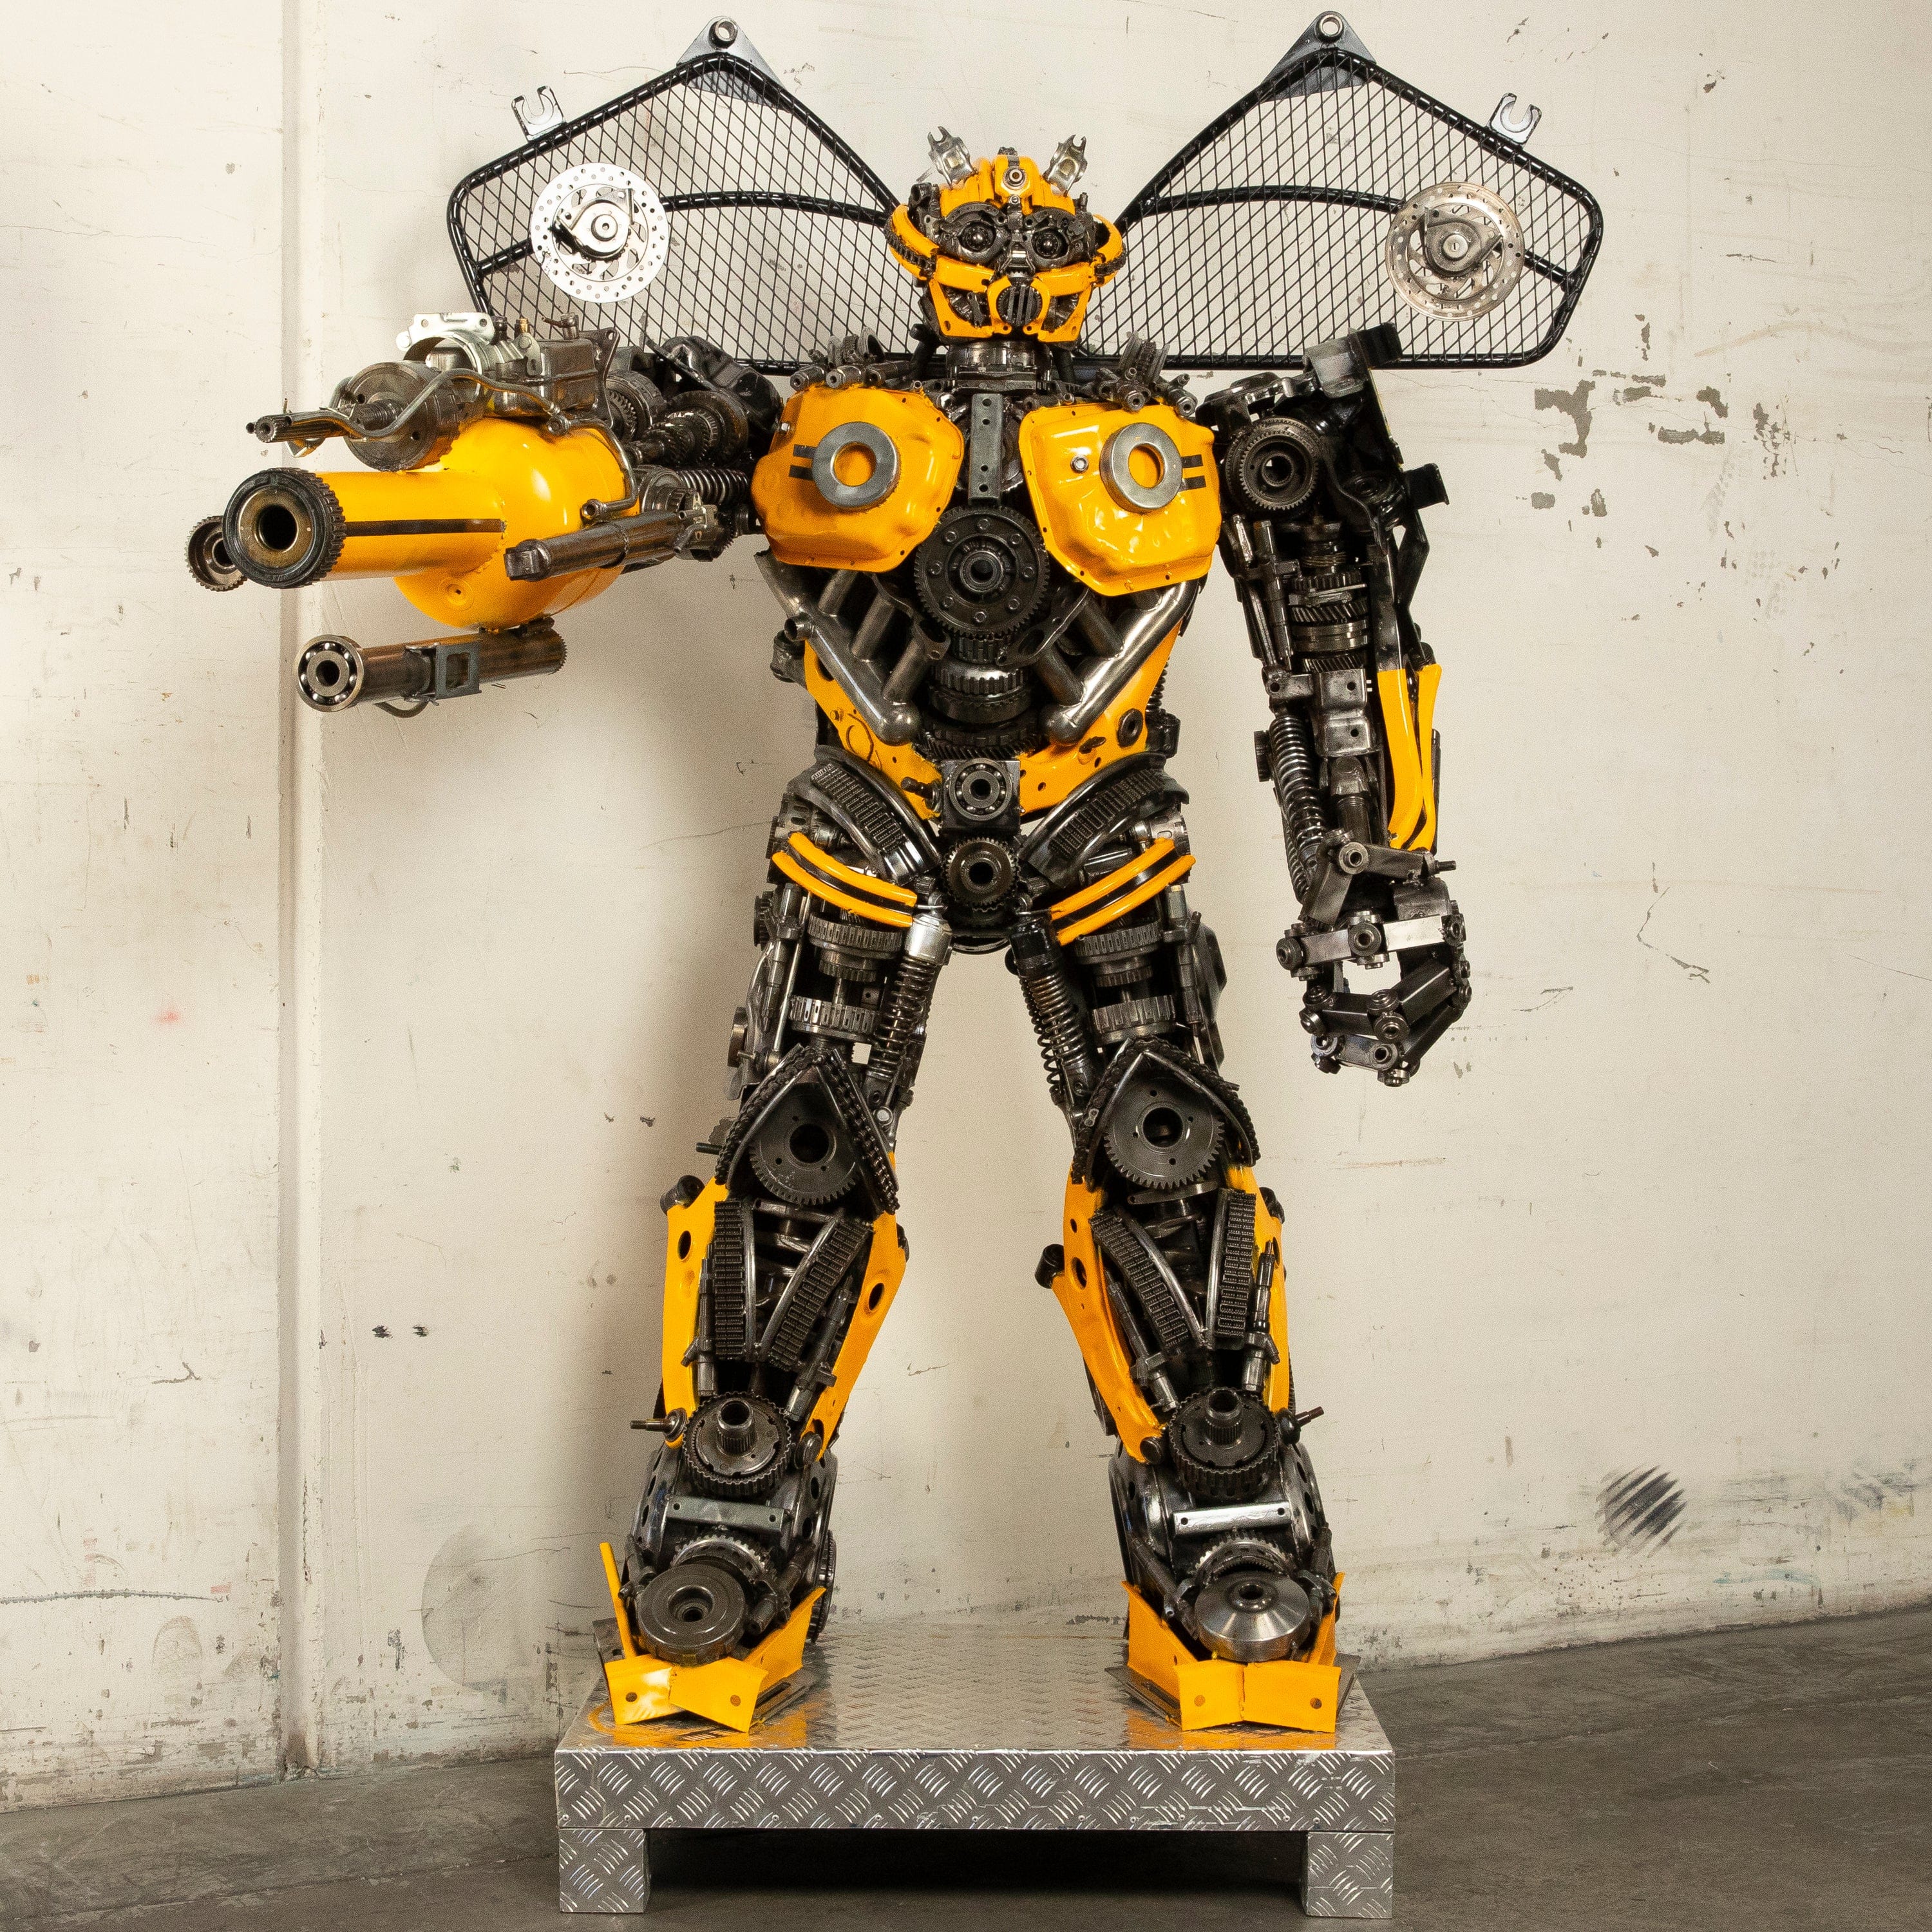 Kalifano Recycled Metal Art 79" Bumblebee Inspired Recycled Metal Art Sculpture RMS-BB200-S20